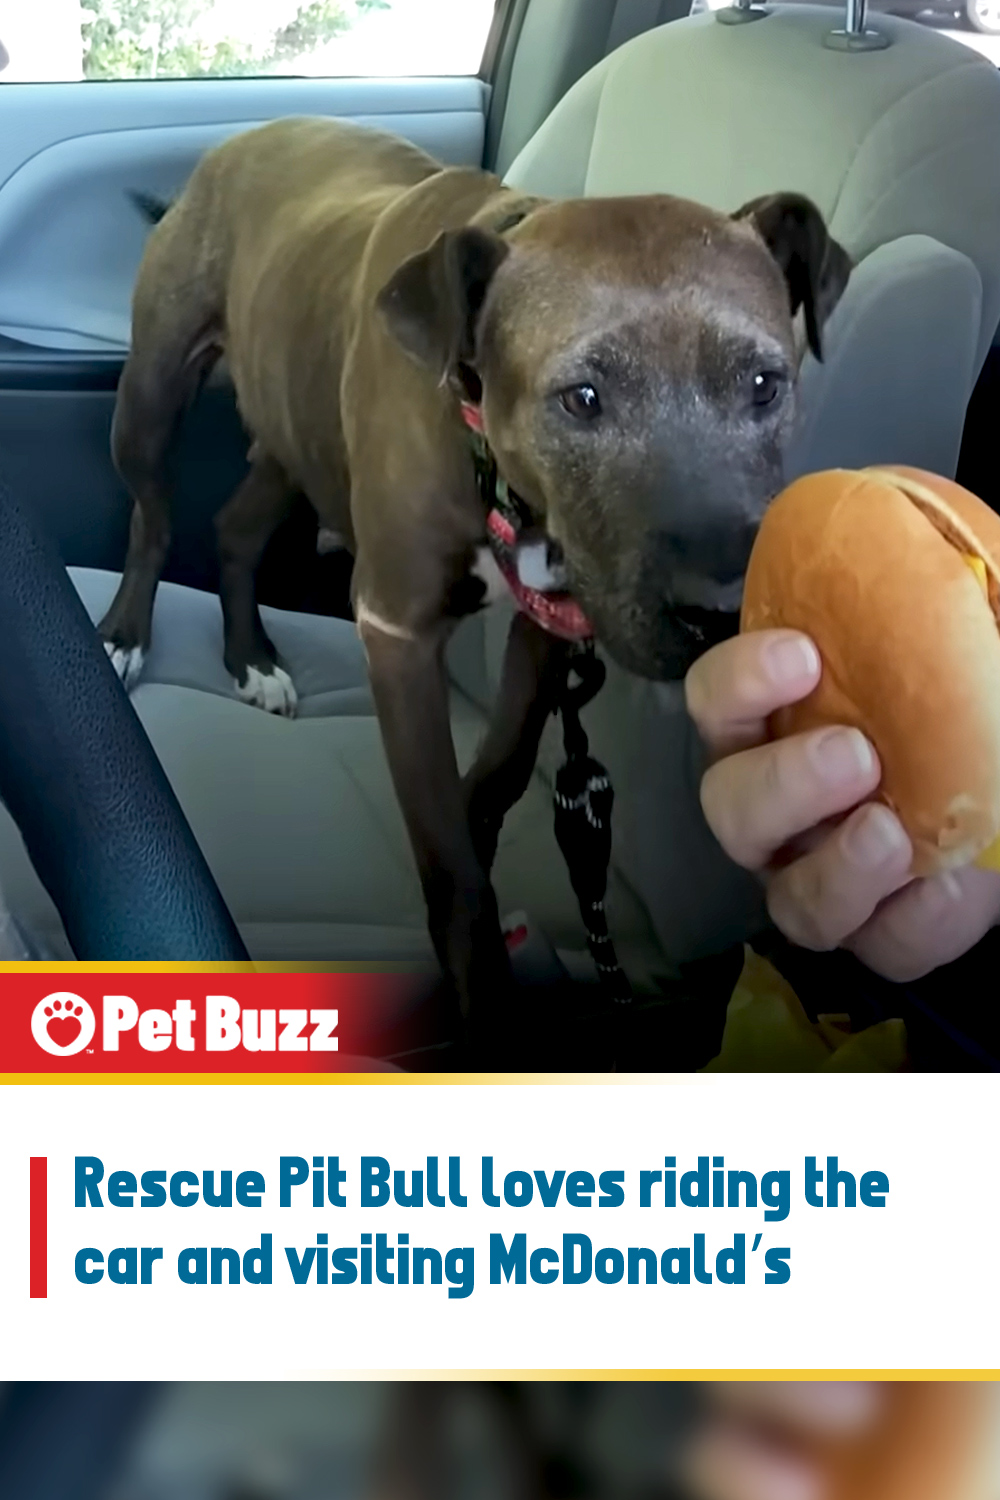 Rescue Pit Bull loves riding the car and visiting McDonald’s